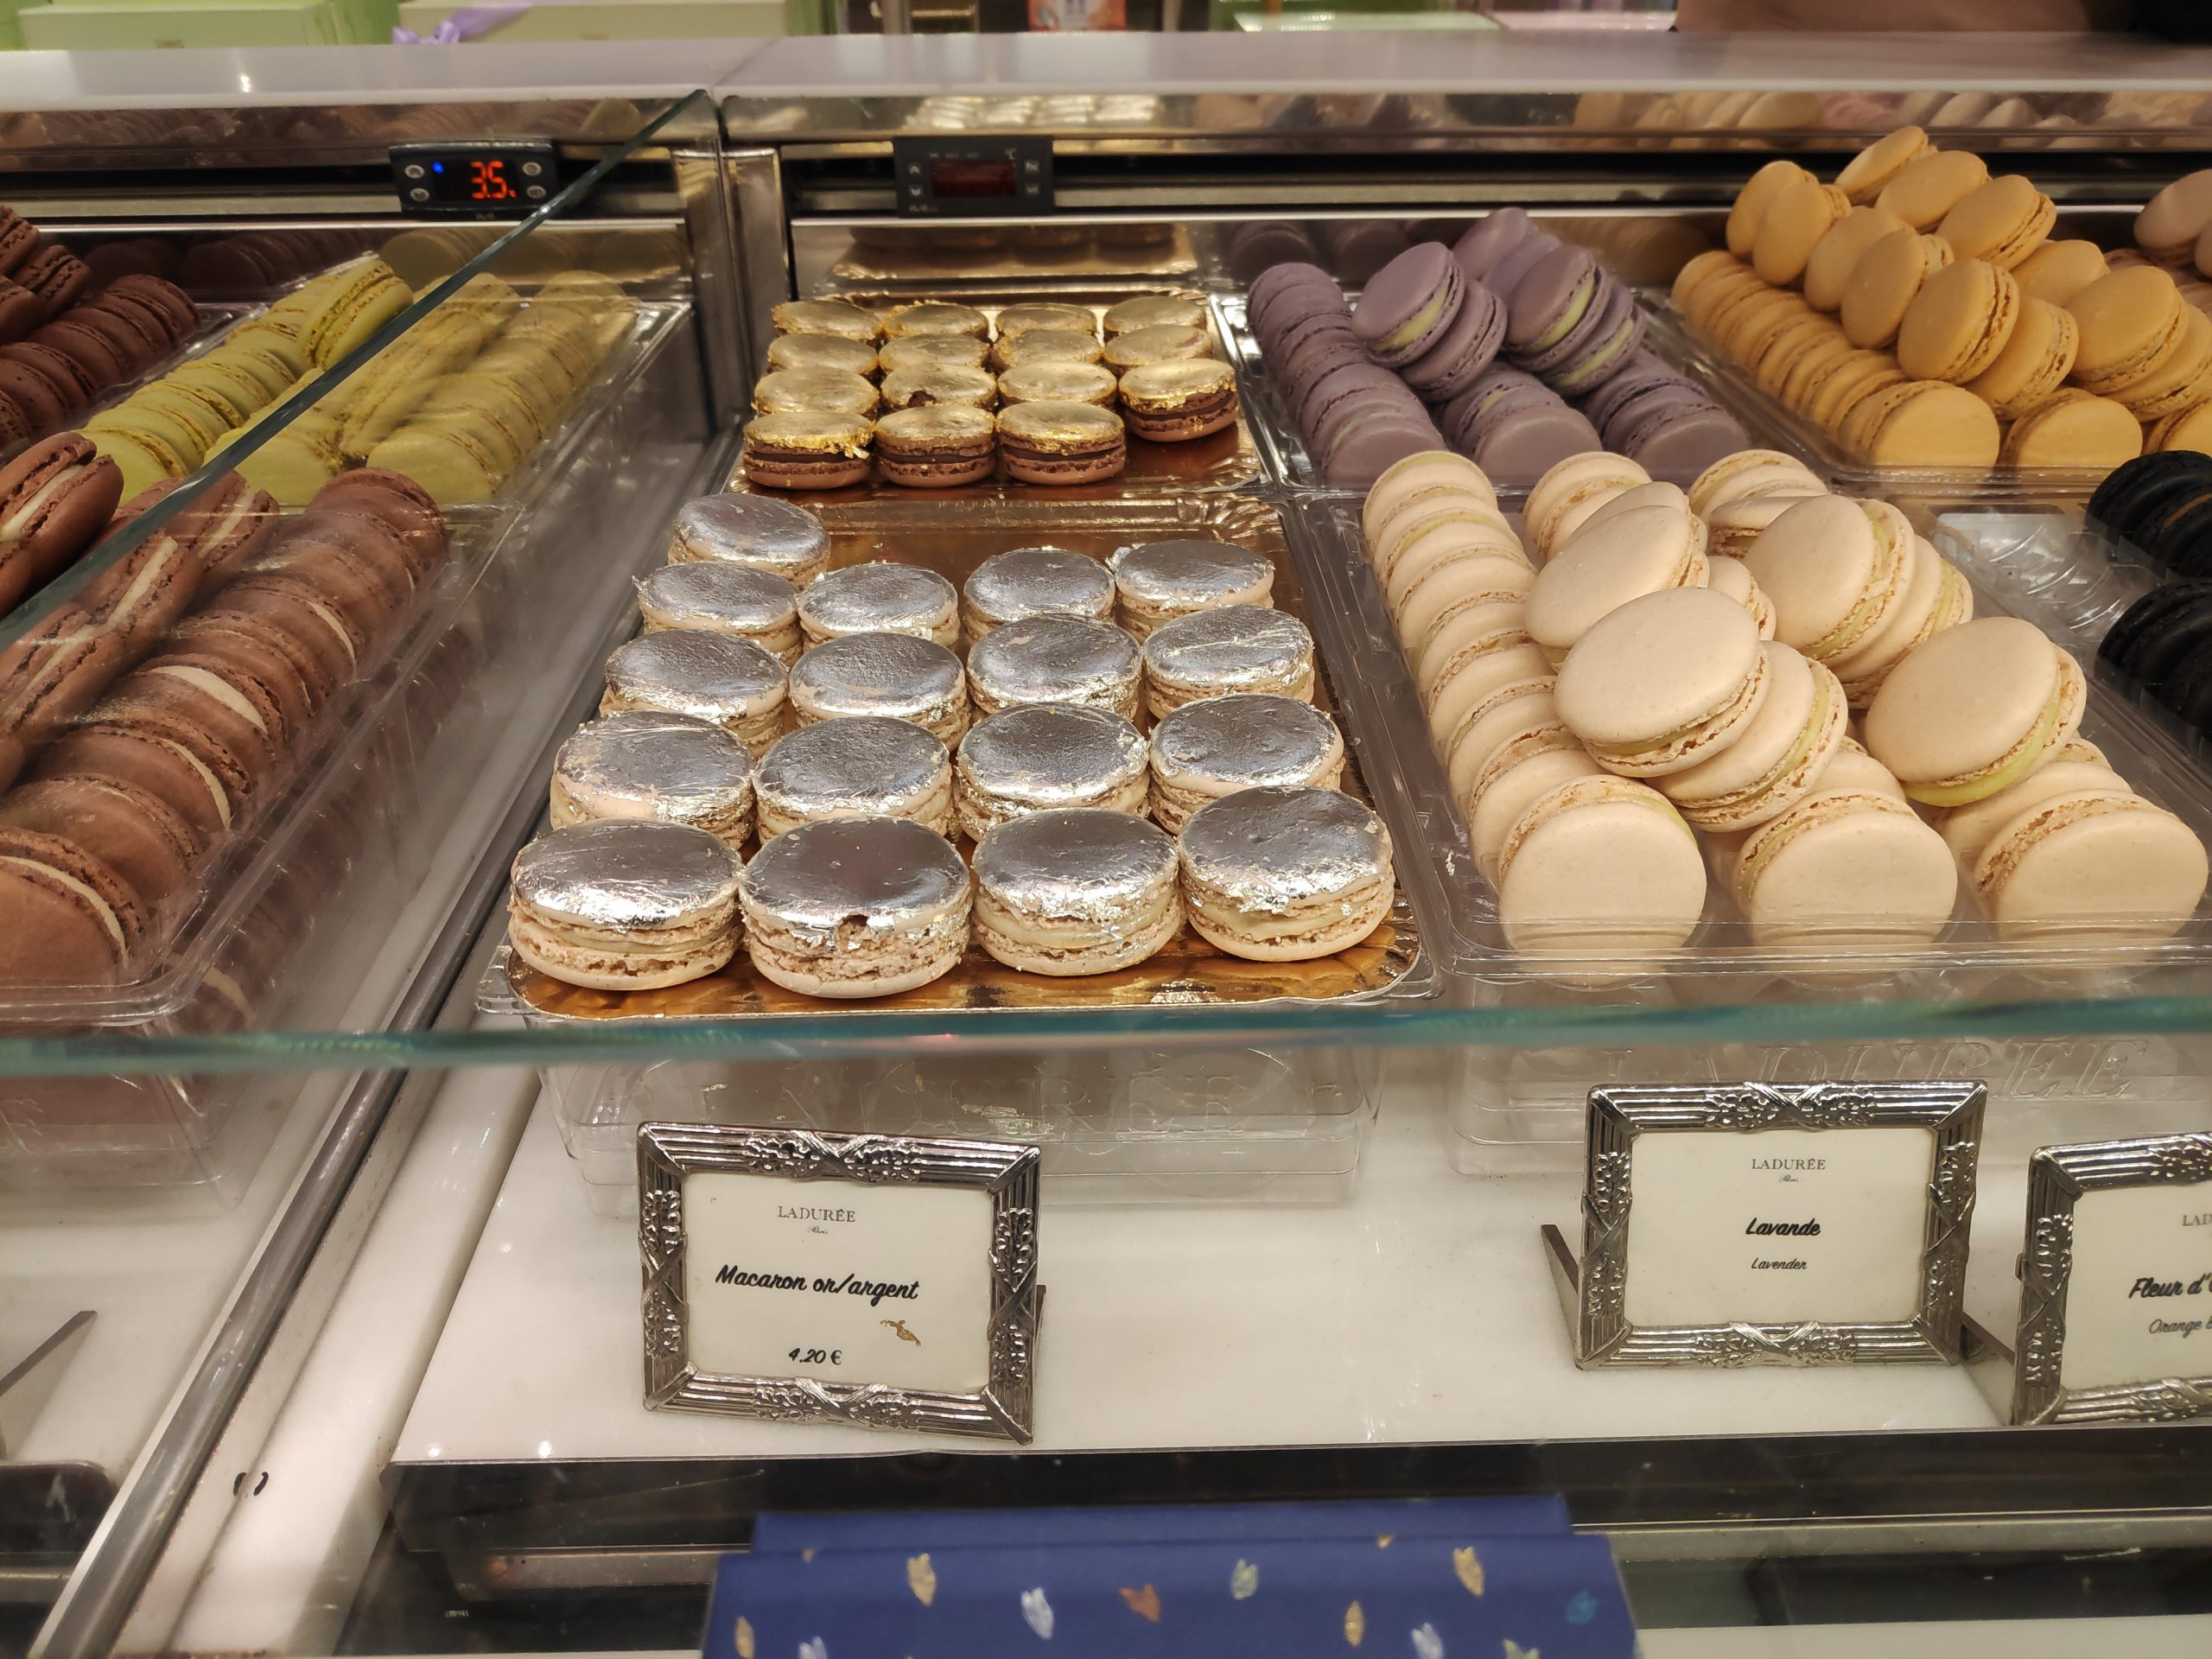 The famous macarons, thats 4.5€ for 1 cookie. :O